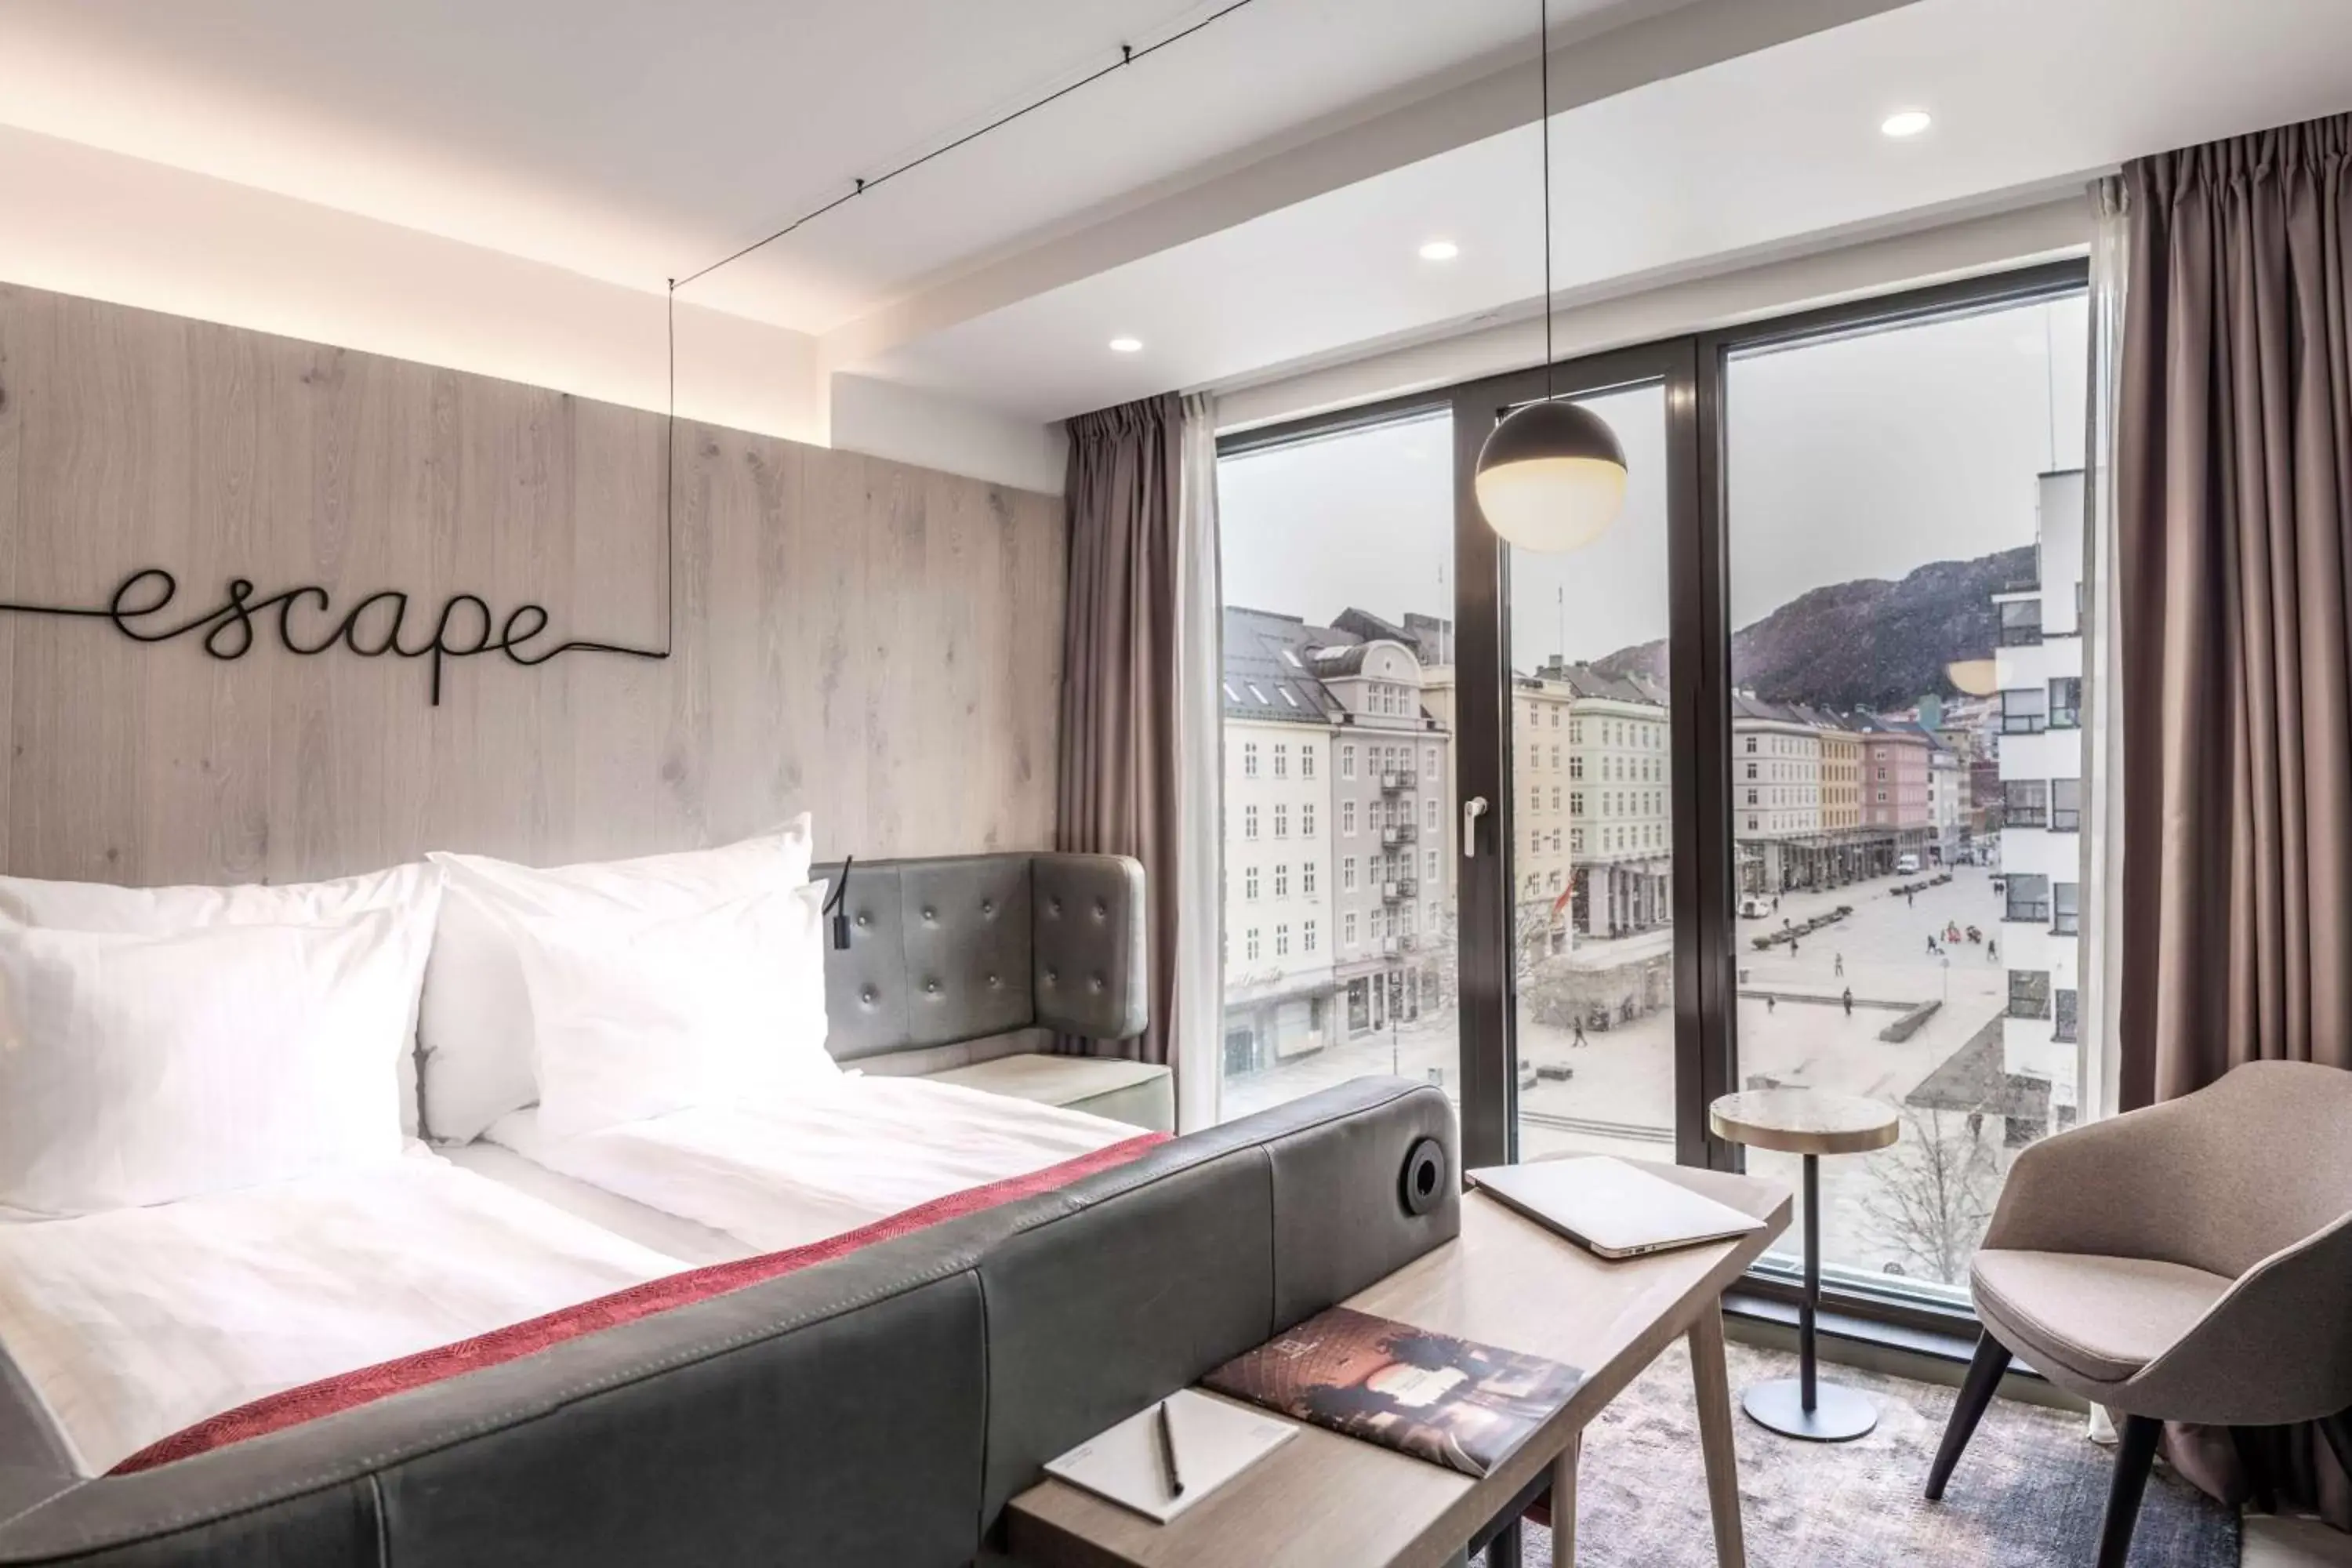 Bedroom in Hotel Norge by Scandic